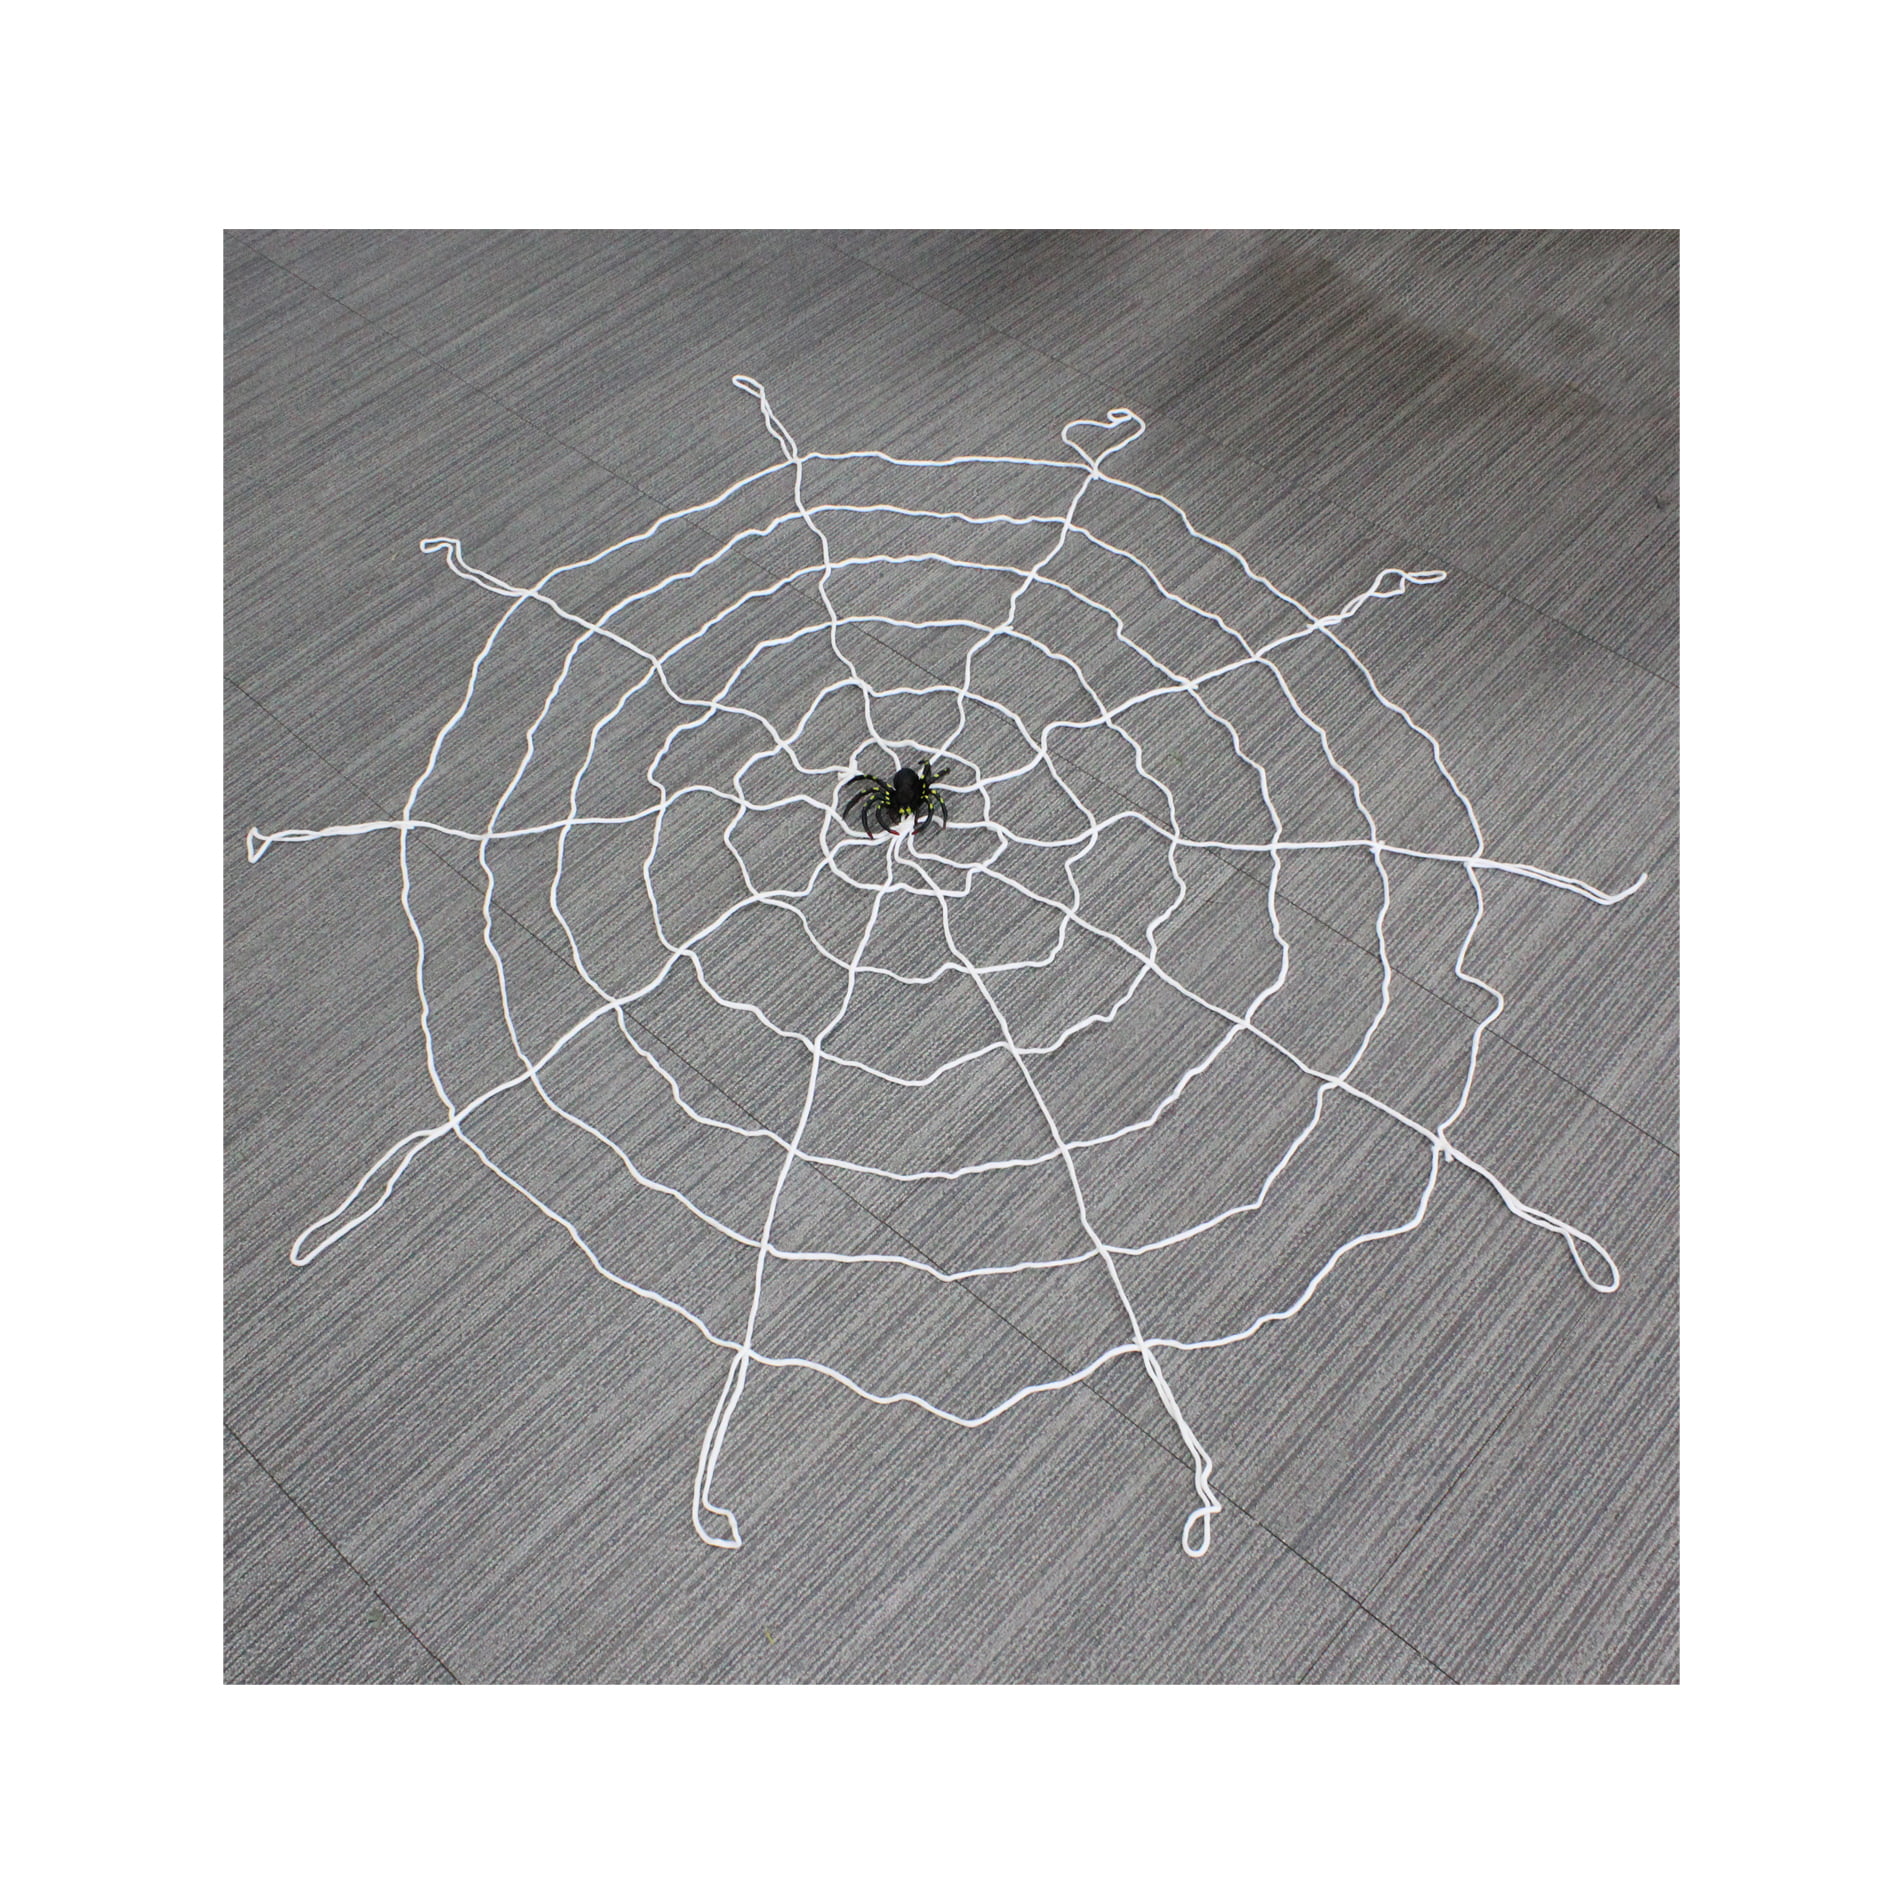 1.5m White Large White Rope Spider Web Halloween Indoor Decorations